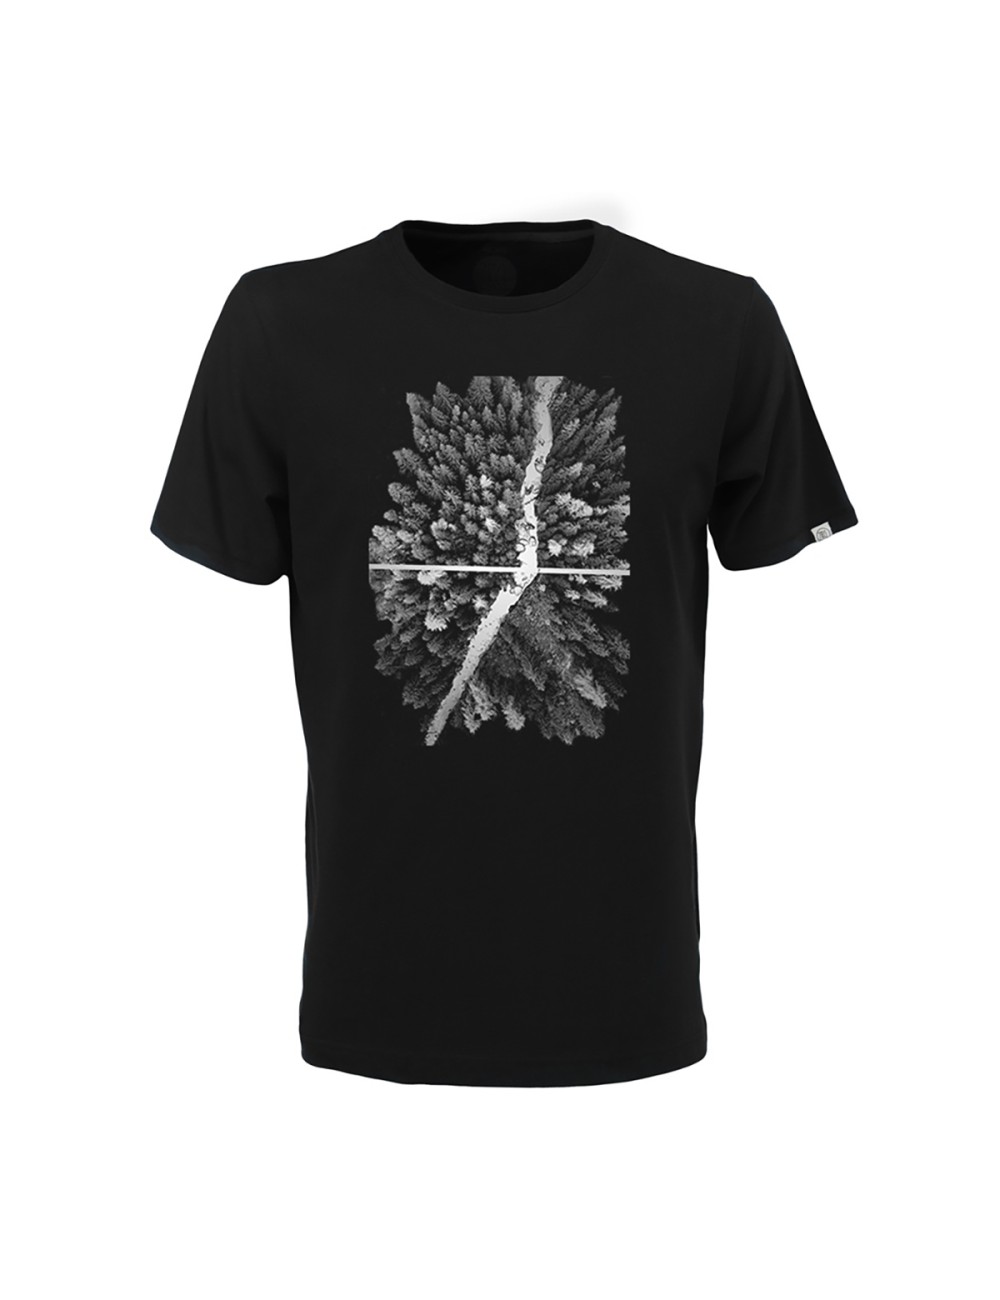 ZRCL T-Shirt Forest Foto - Black